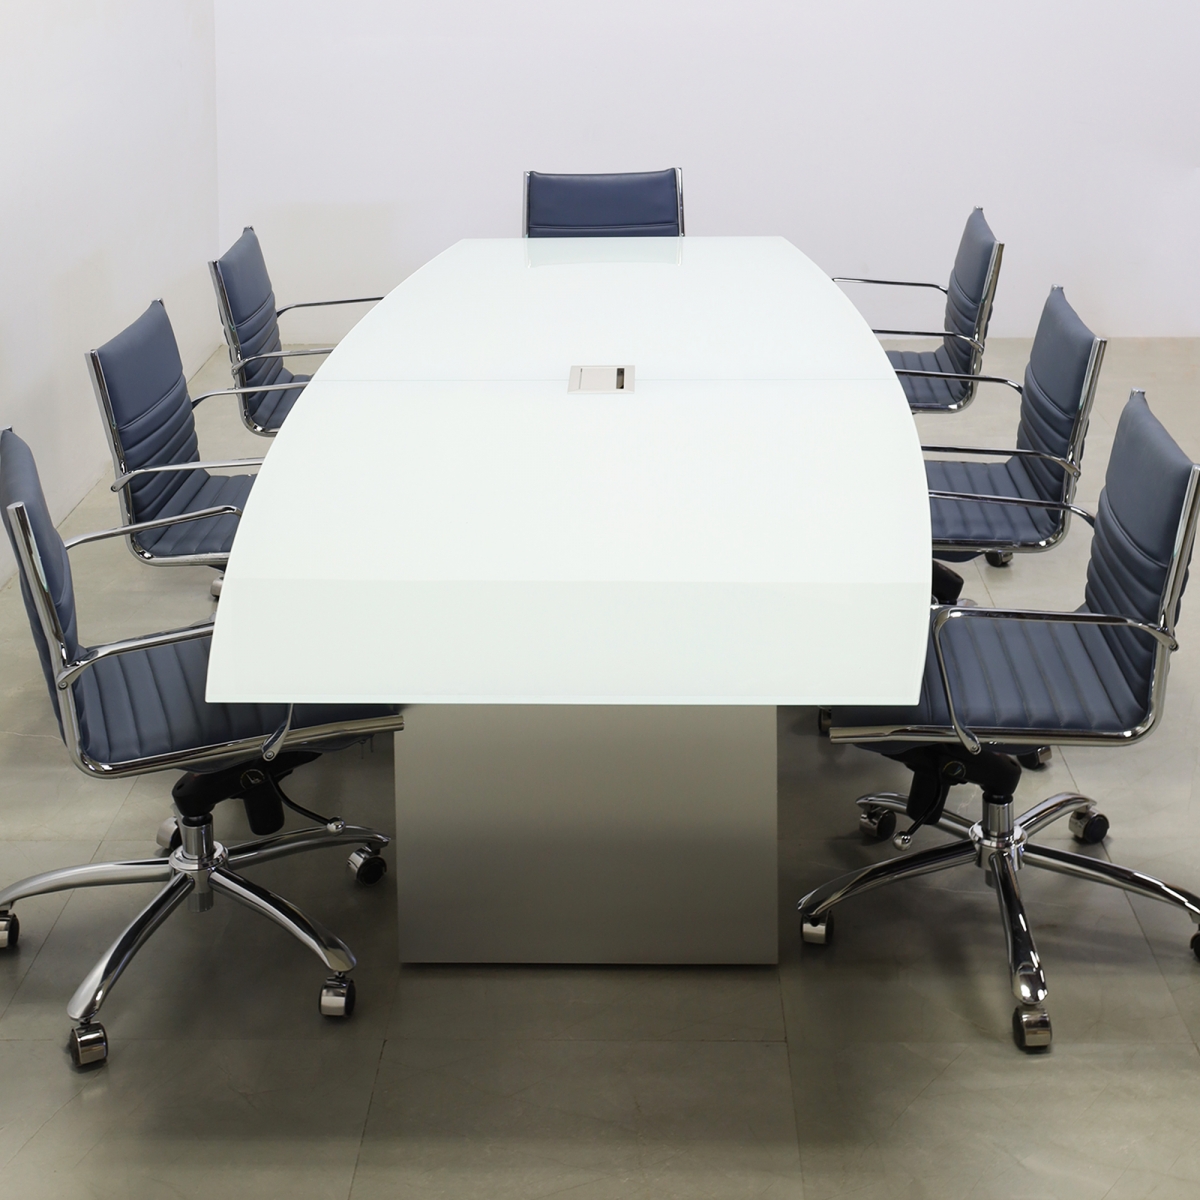 Omaha Boat Shape Conference Table With Tempered Glass Top